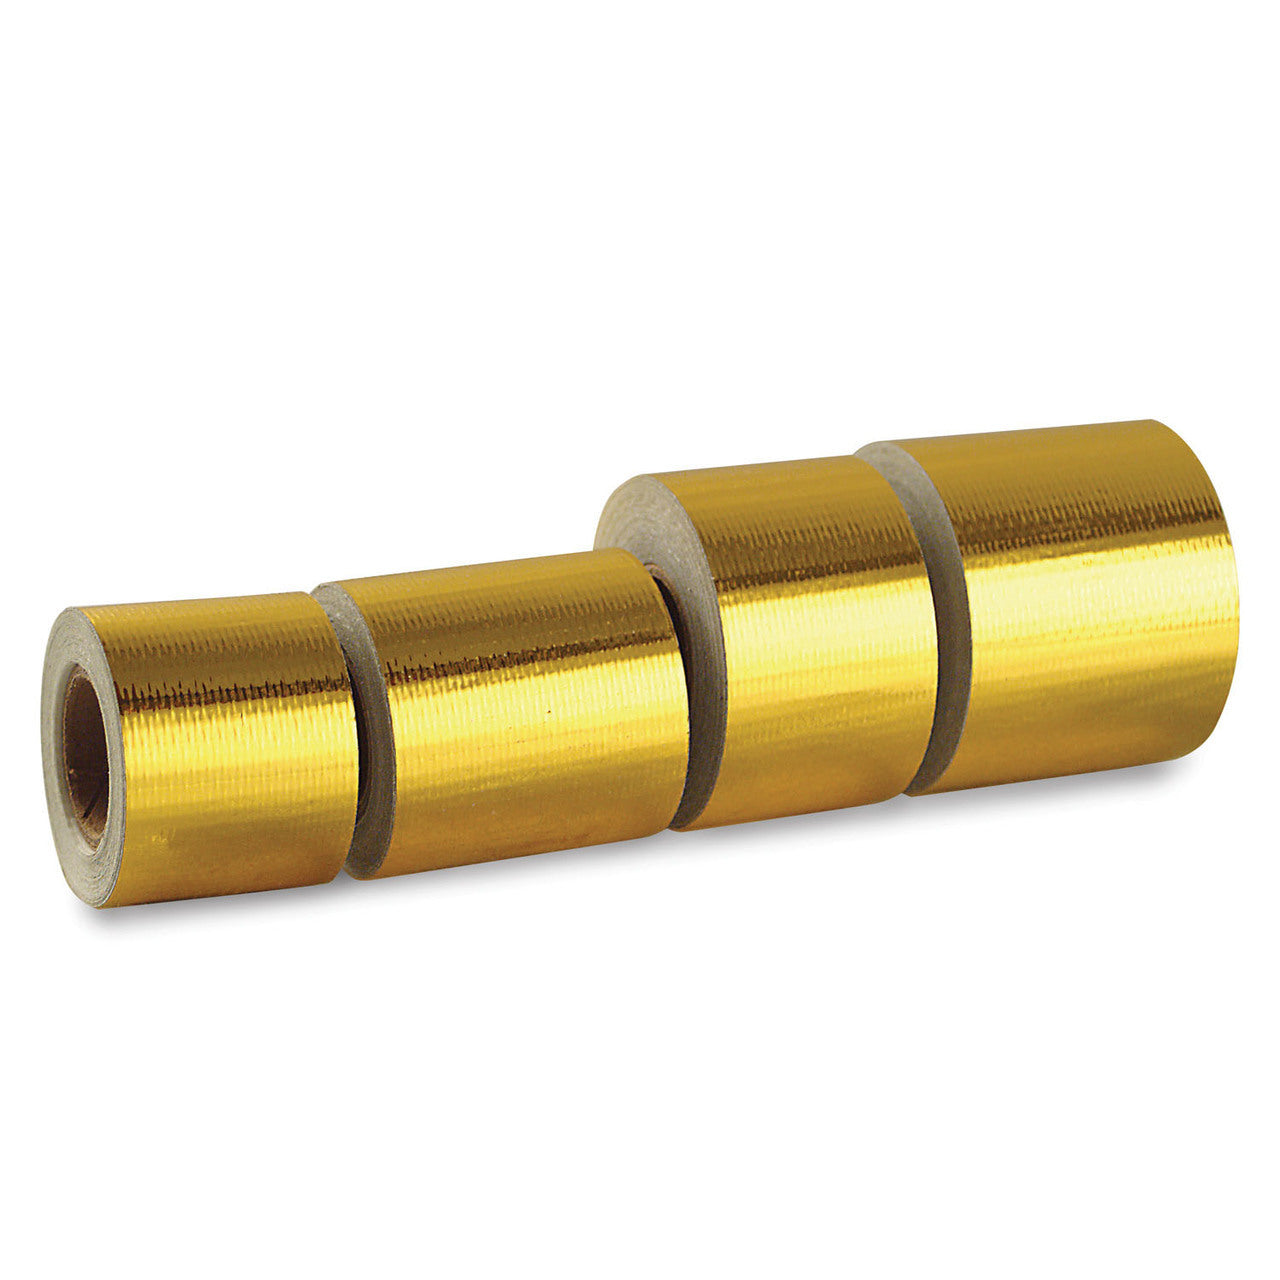 DEI 010397 Reflect-A-GOLD 2" x 30ft Tape Roll Photo-1 